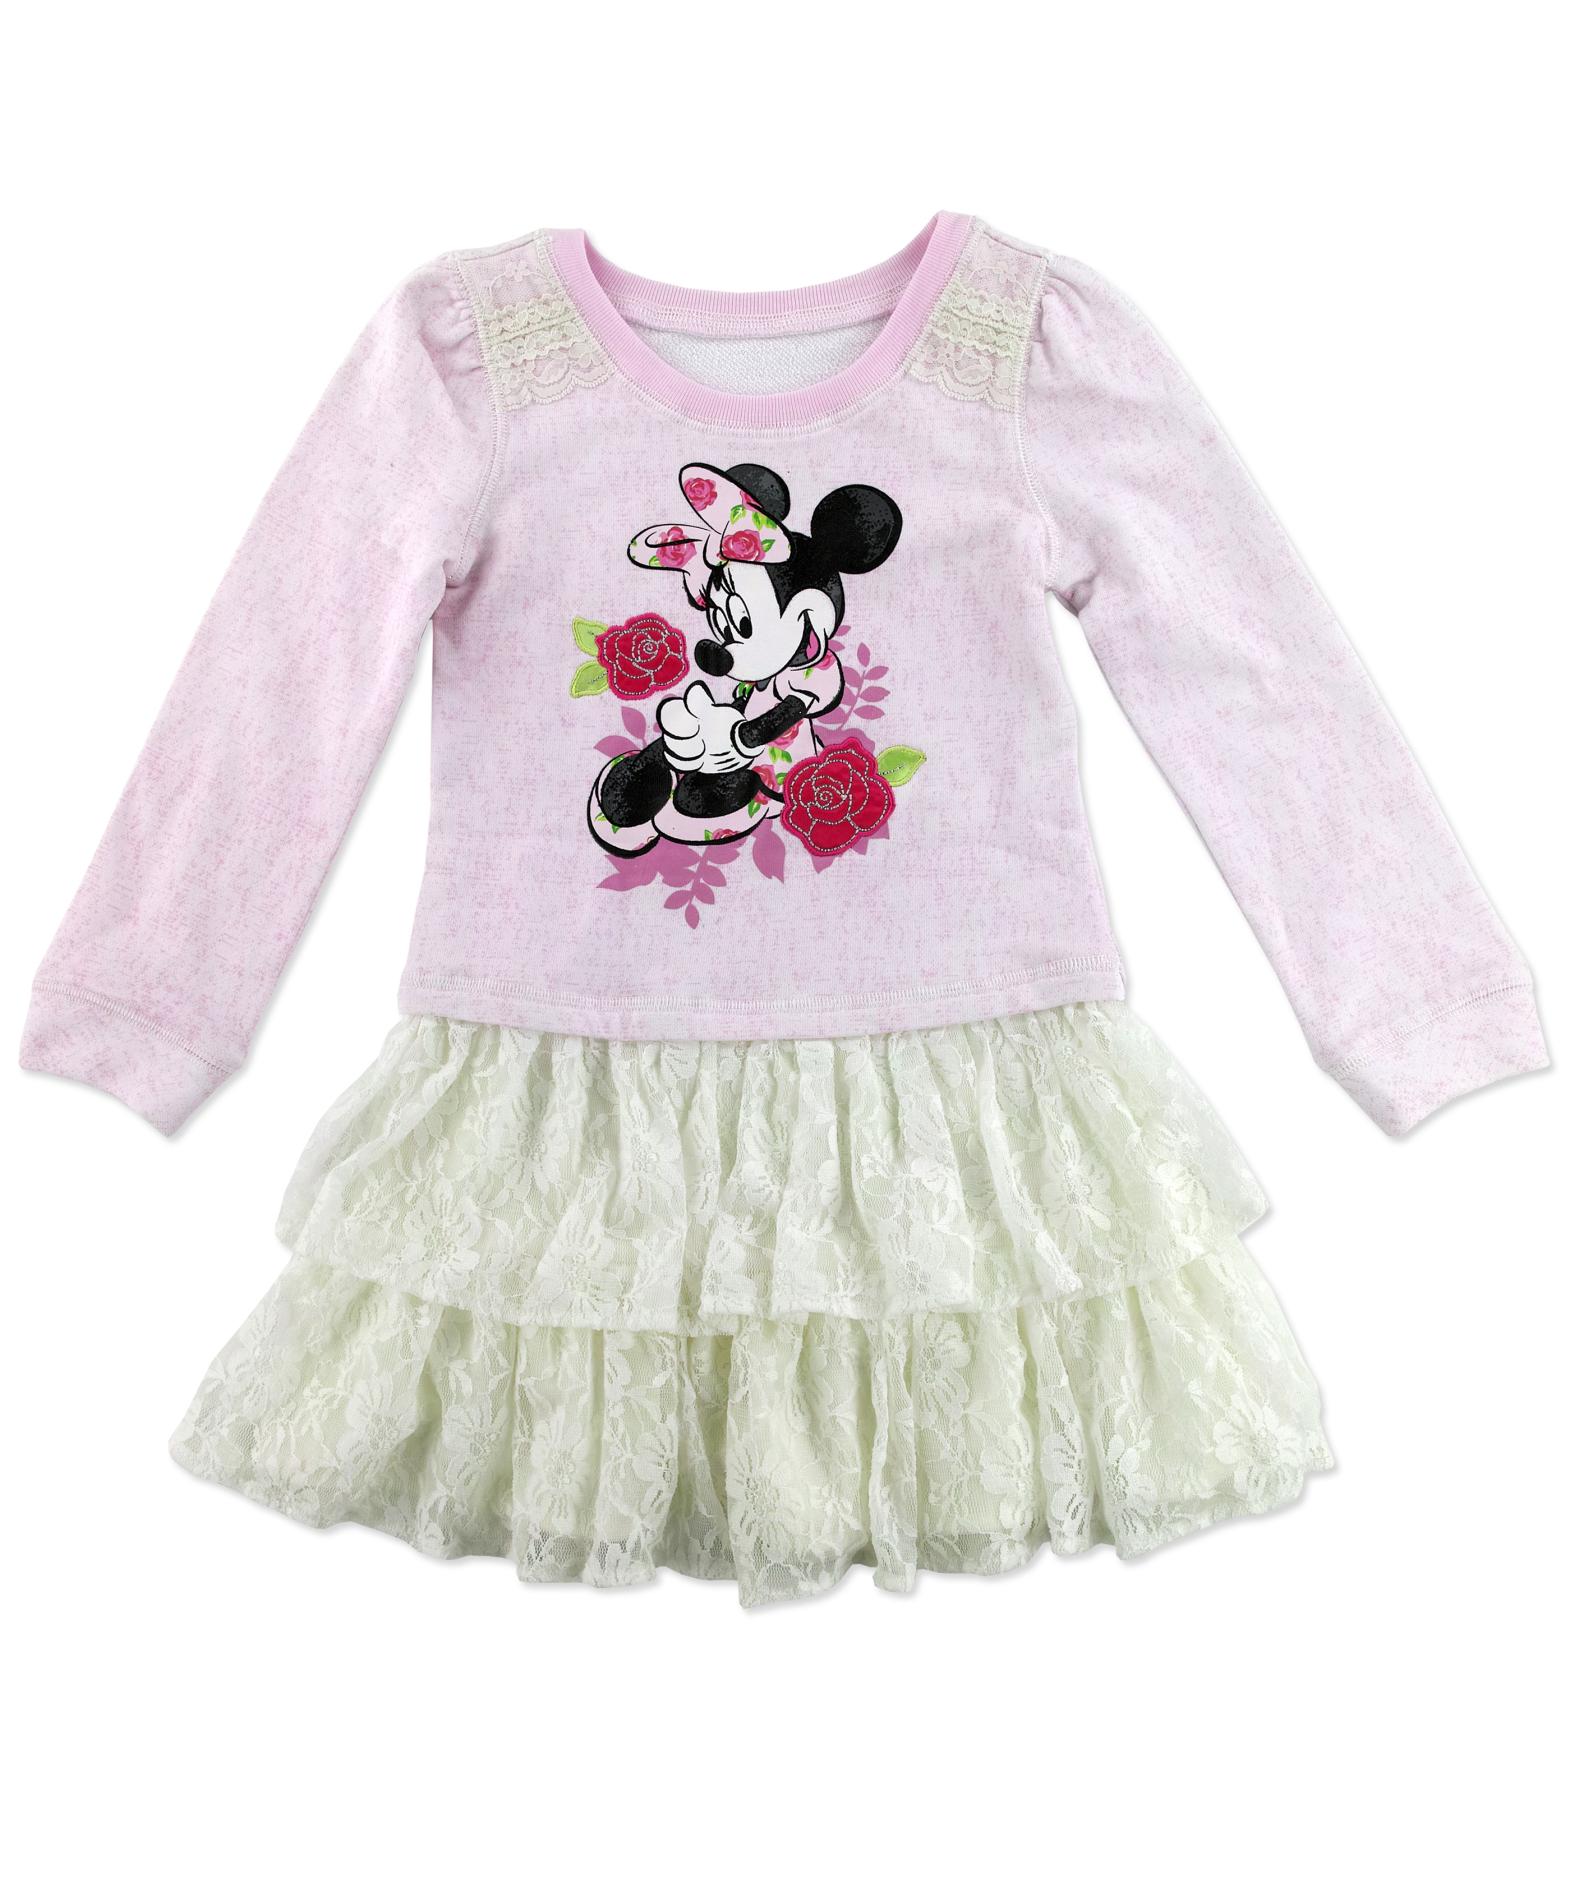 Disney Minnie Mouse Toddler Girl's Dress